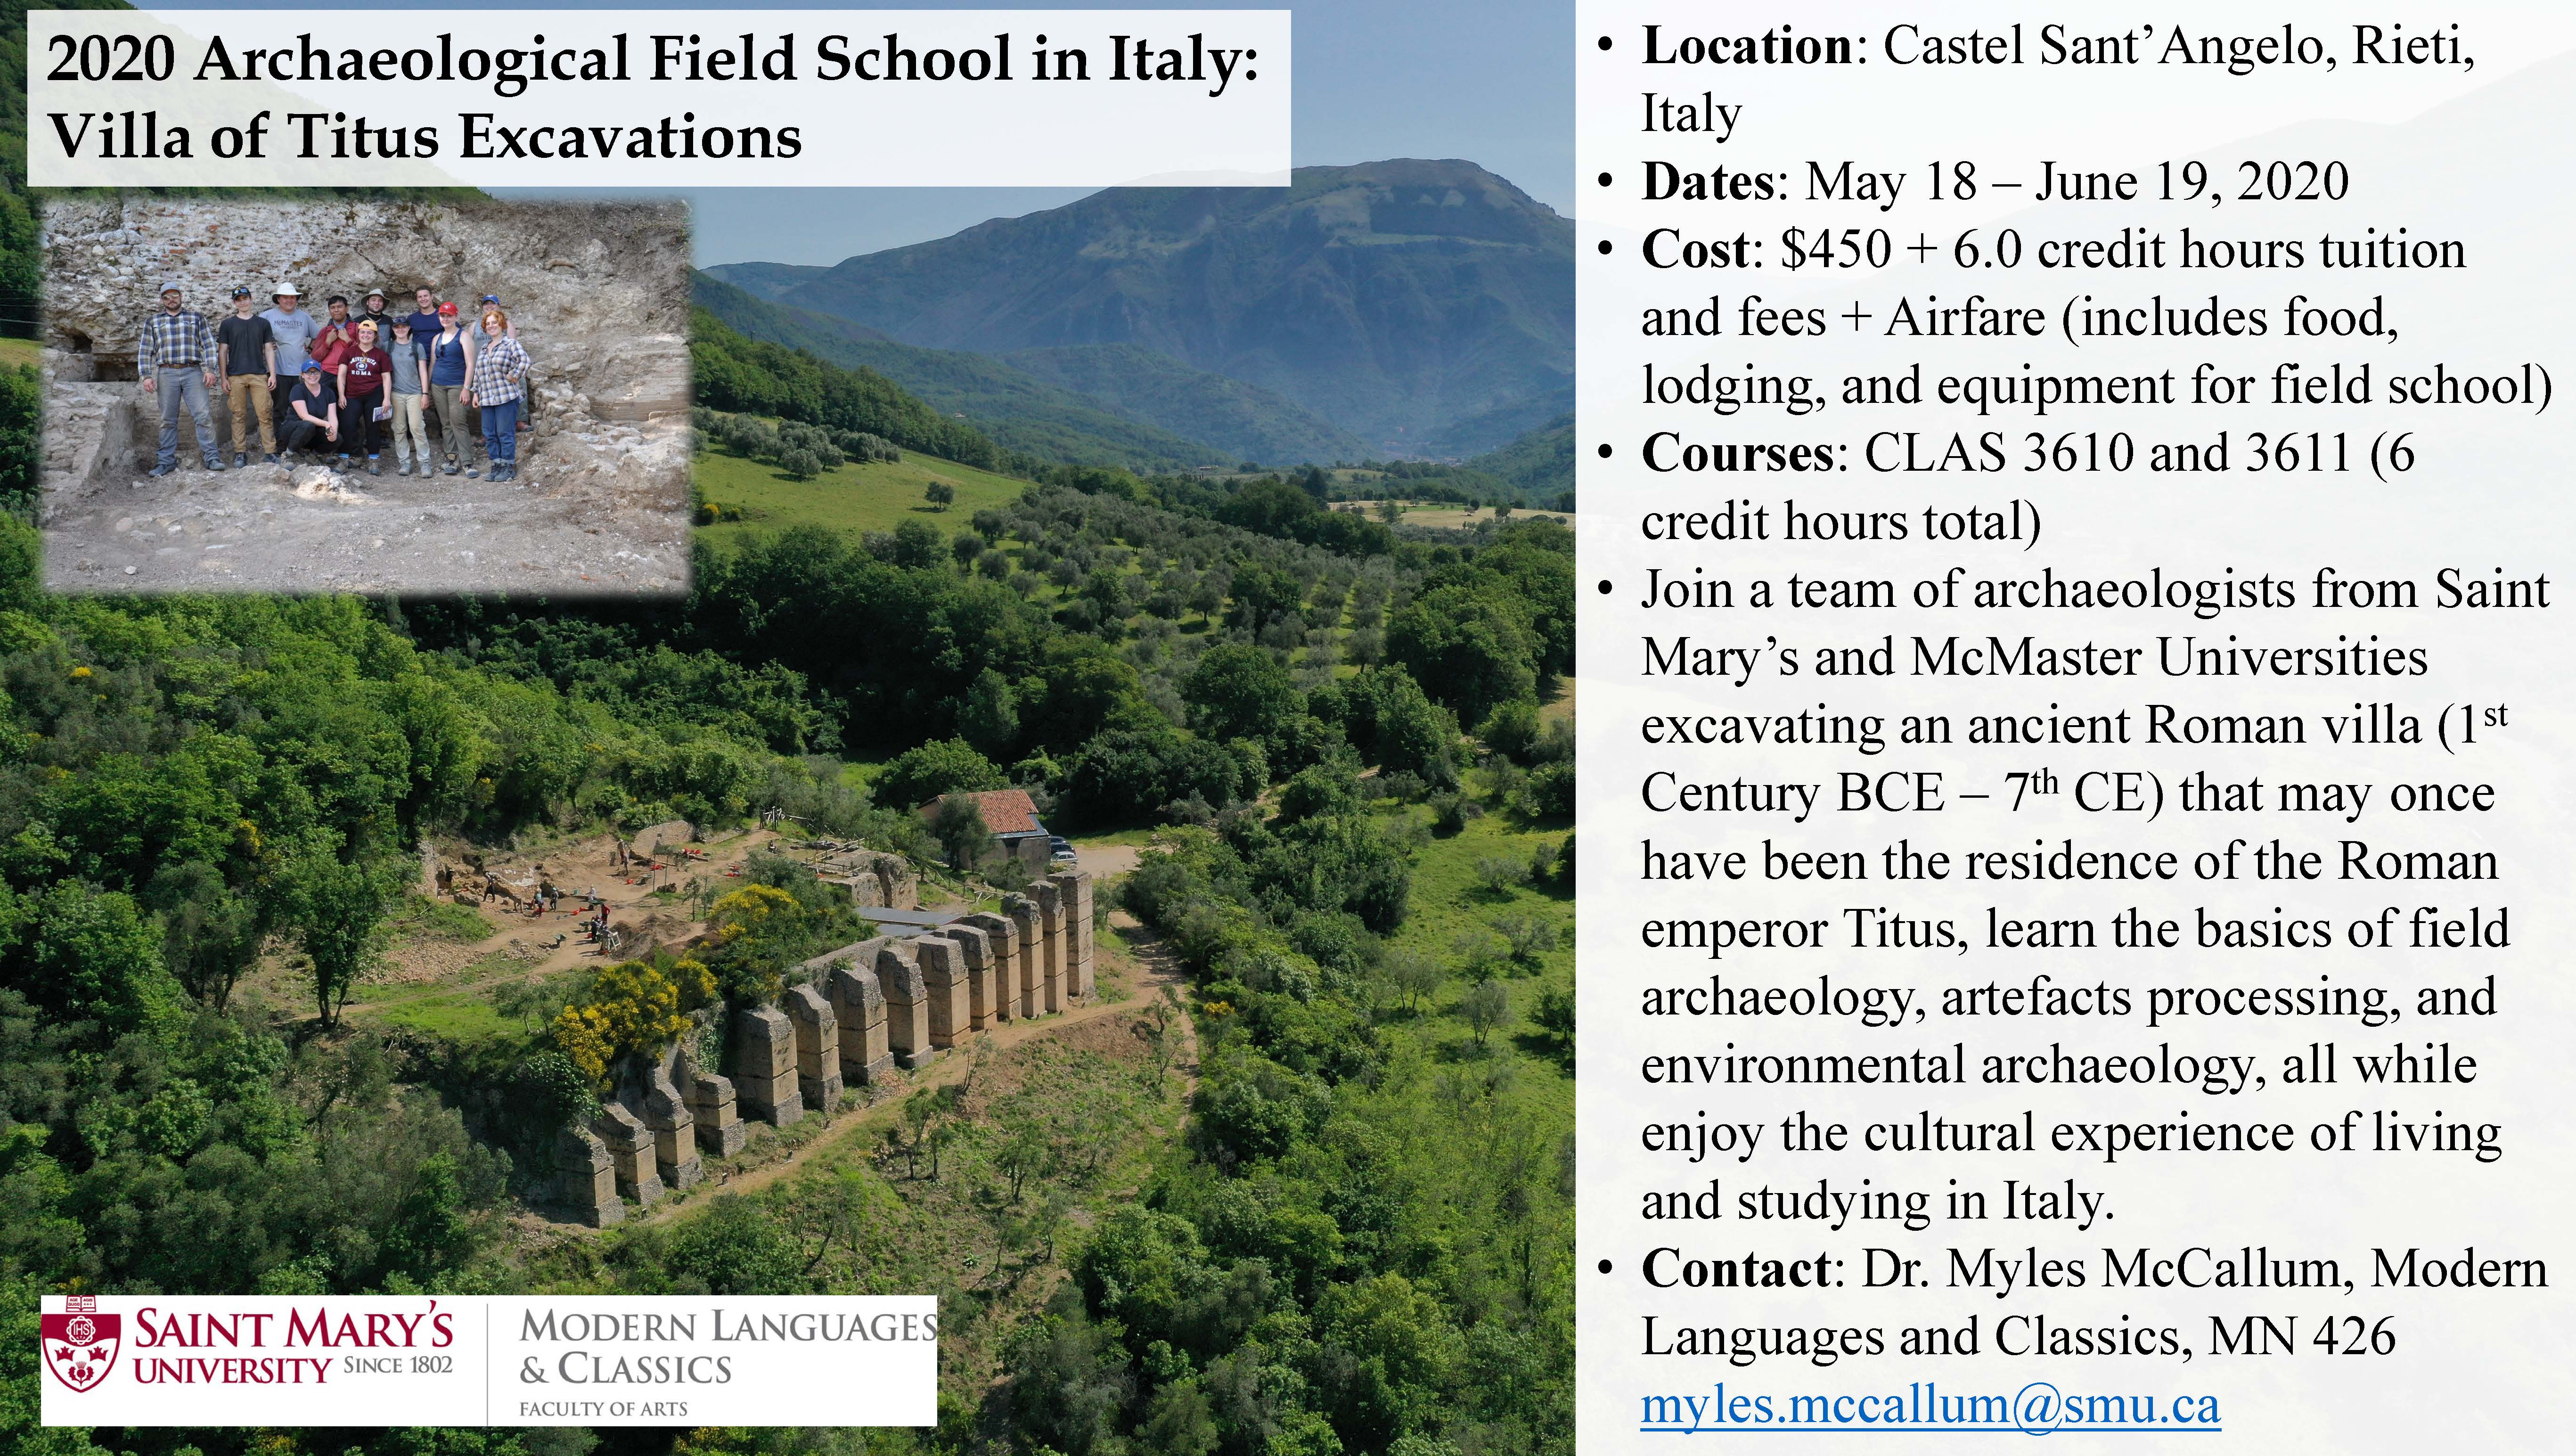 Italy - Archaeological Field School